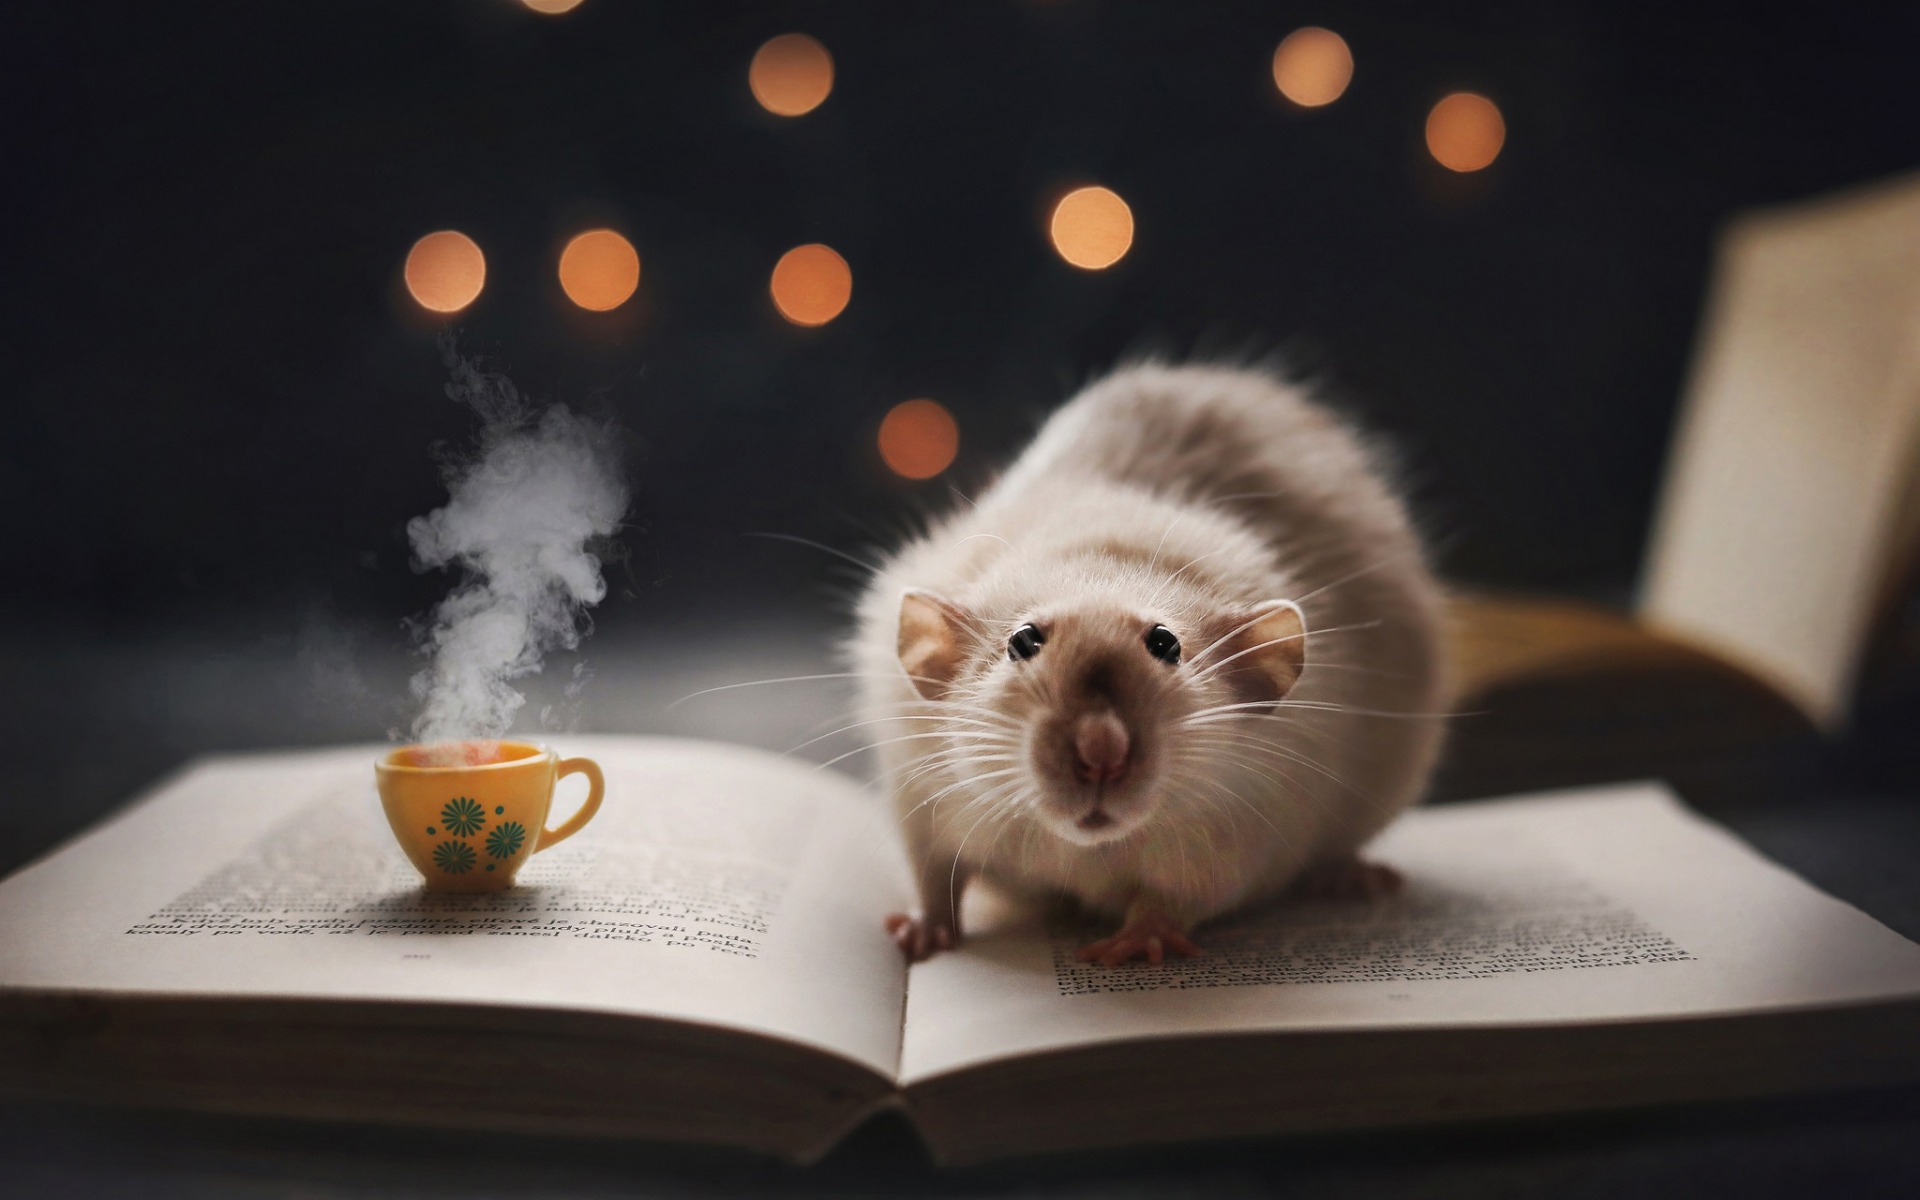 Download wallpapers decorative rat, pets, cute animals, book, coffee for  desktop with resolution 1920x1200. High Quality HD pictures wallpapers